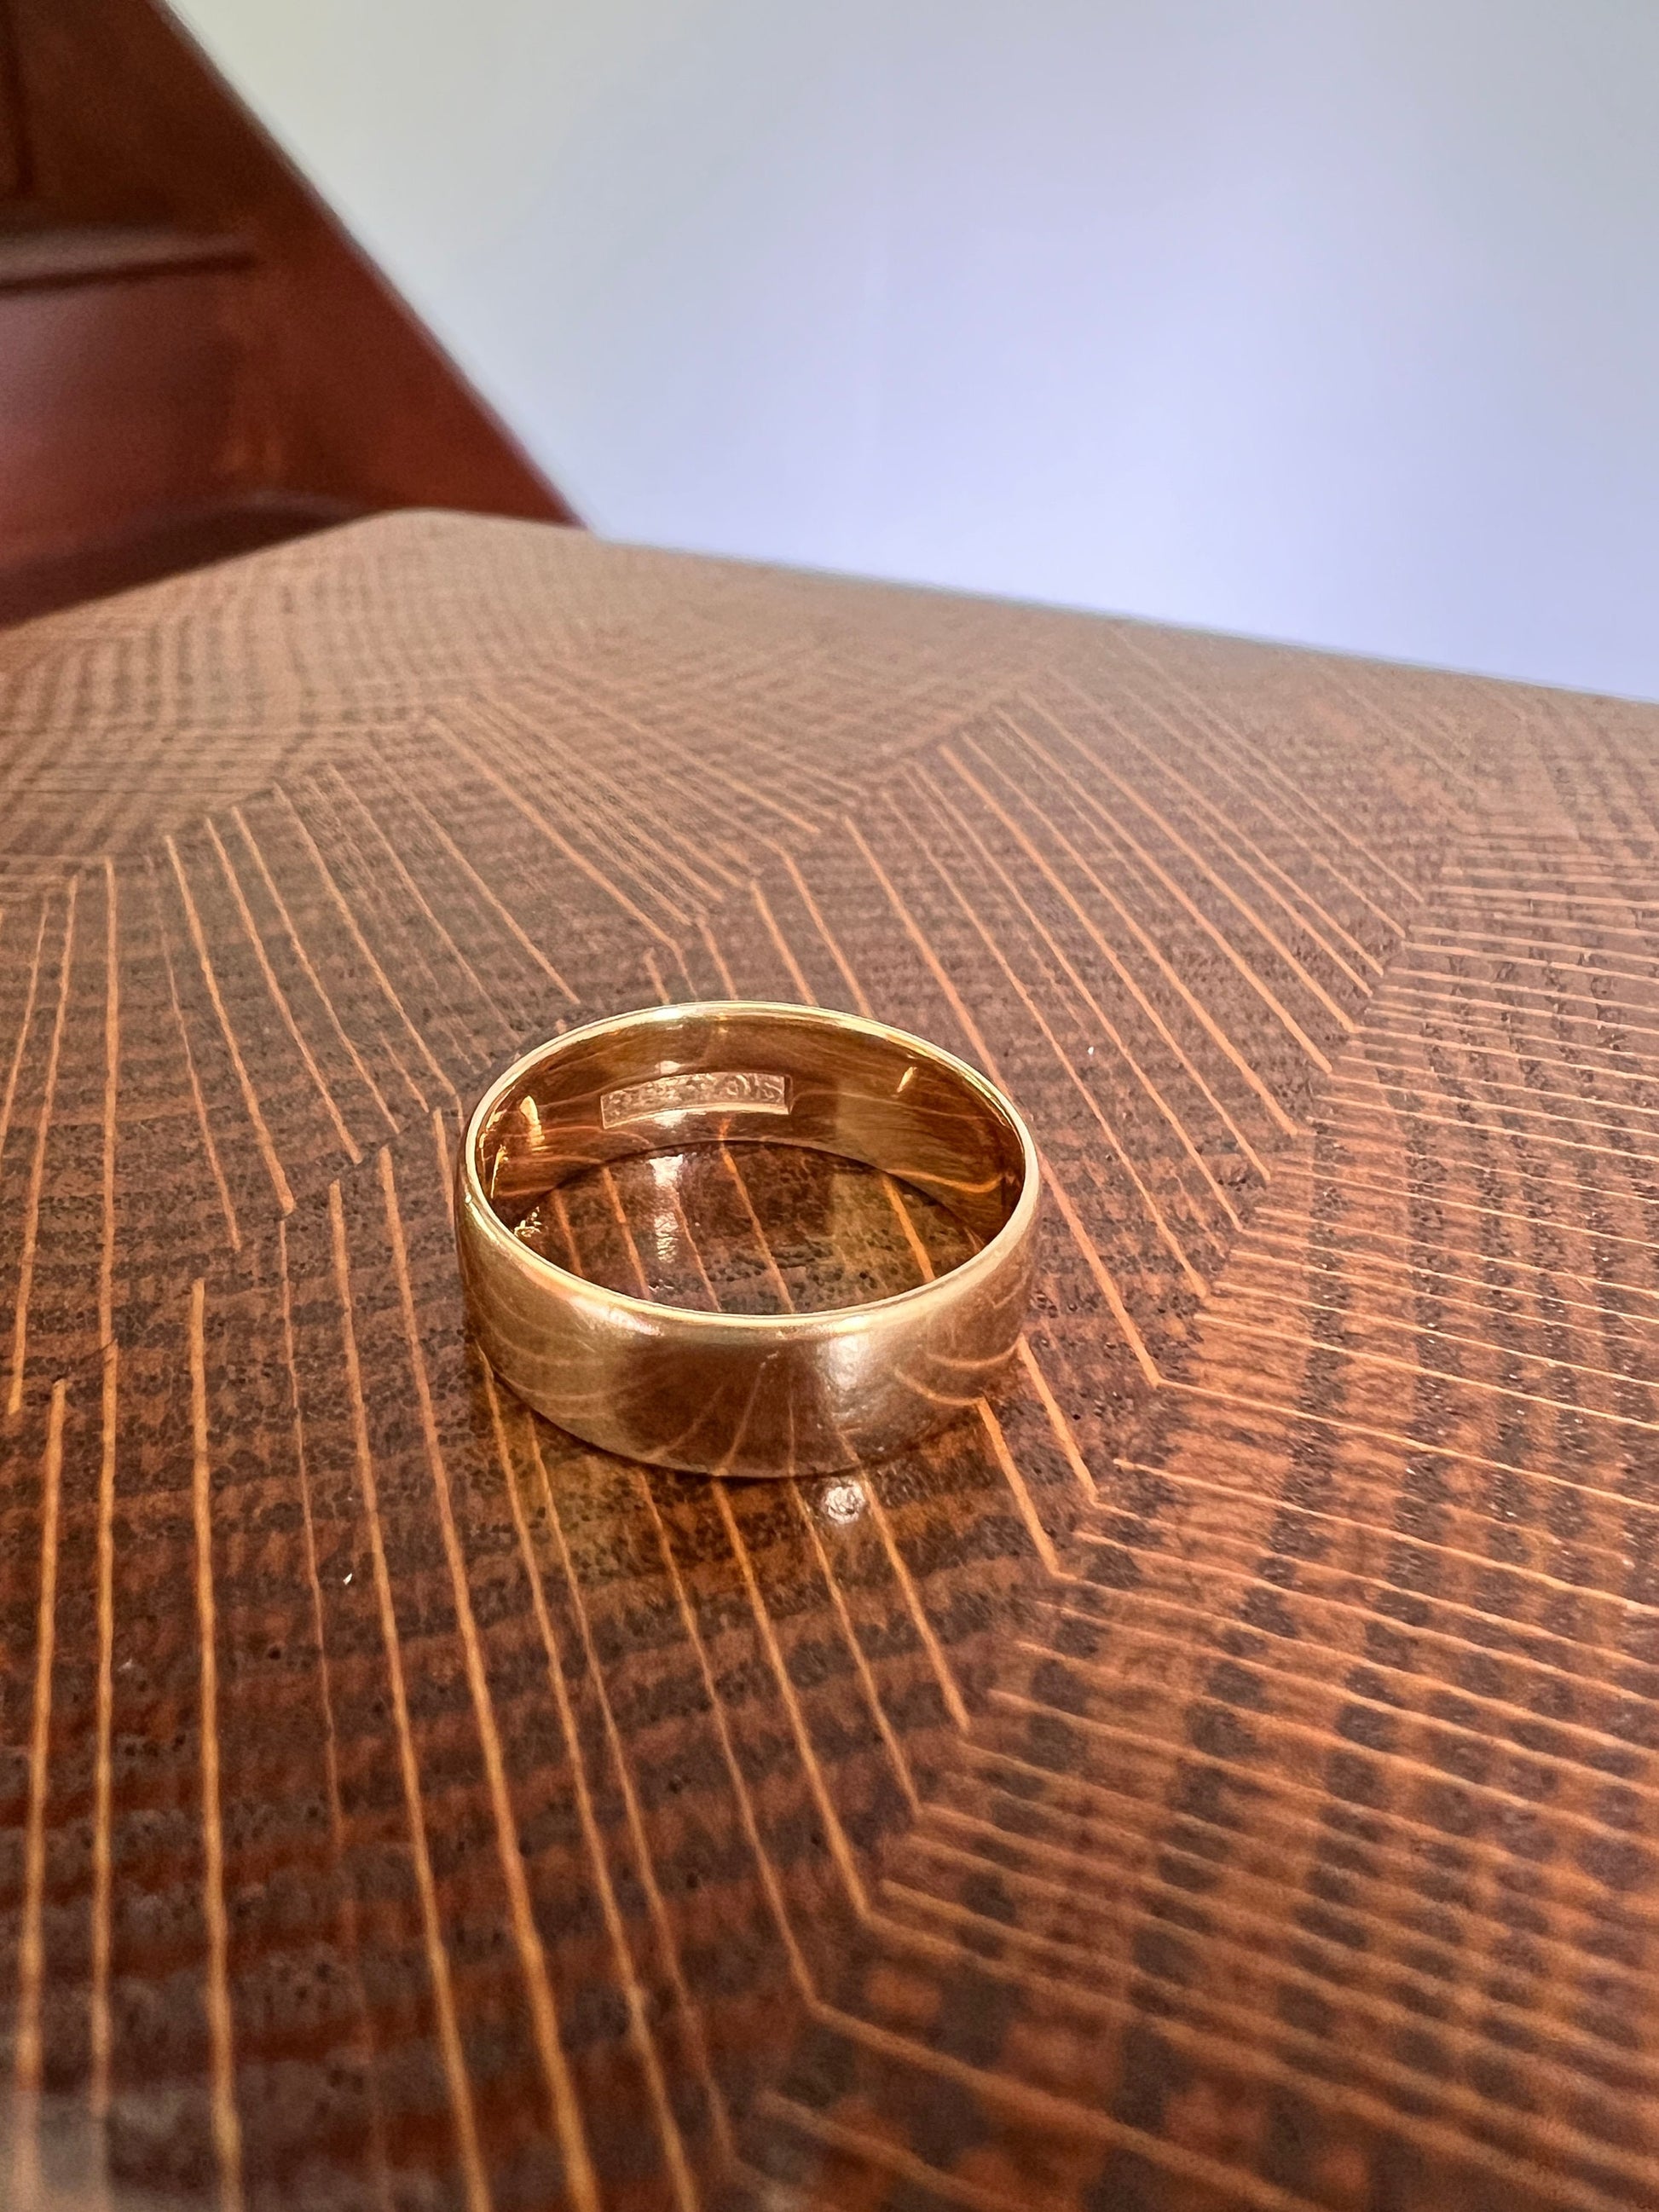 Victorian Antique 5.5mm Wedding Cigar Band 3.8g 18k Gold Solid Flat Ring Stacker Romantic Gift Chunky Sturdy Warm Glowing Patina